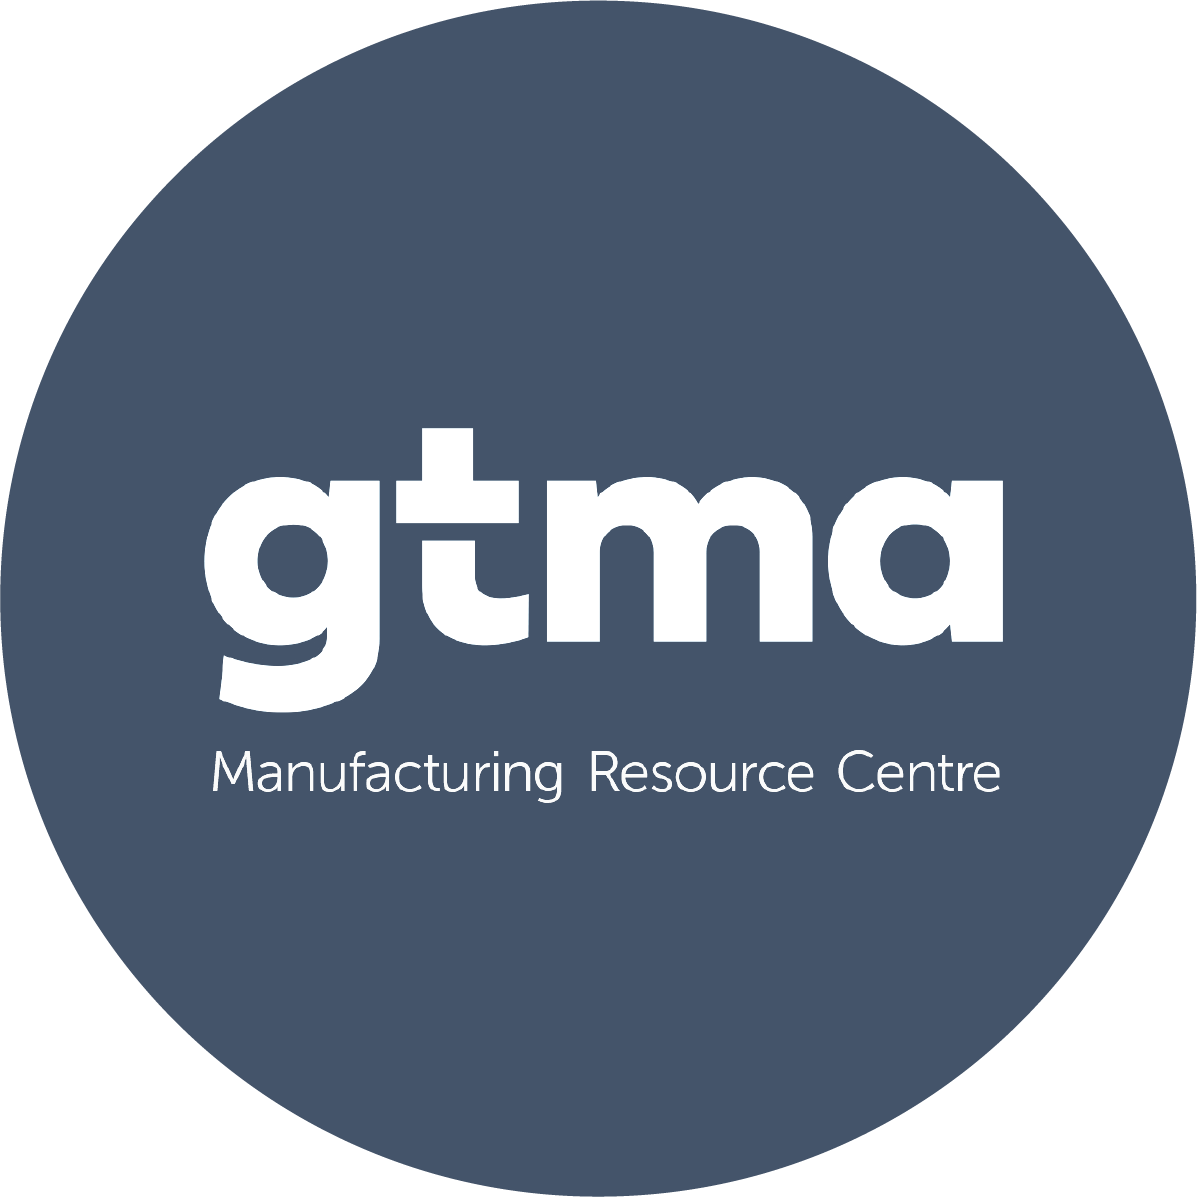 GTMA Manufacturing Resource Centre logo in white and in blue circle